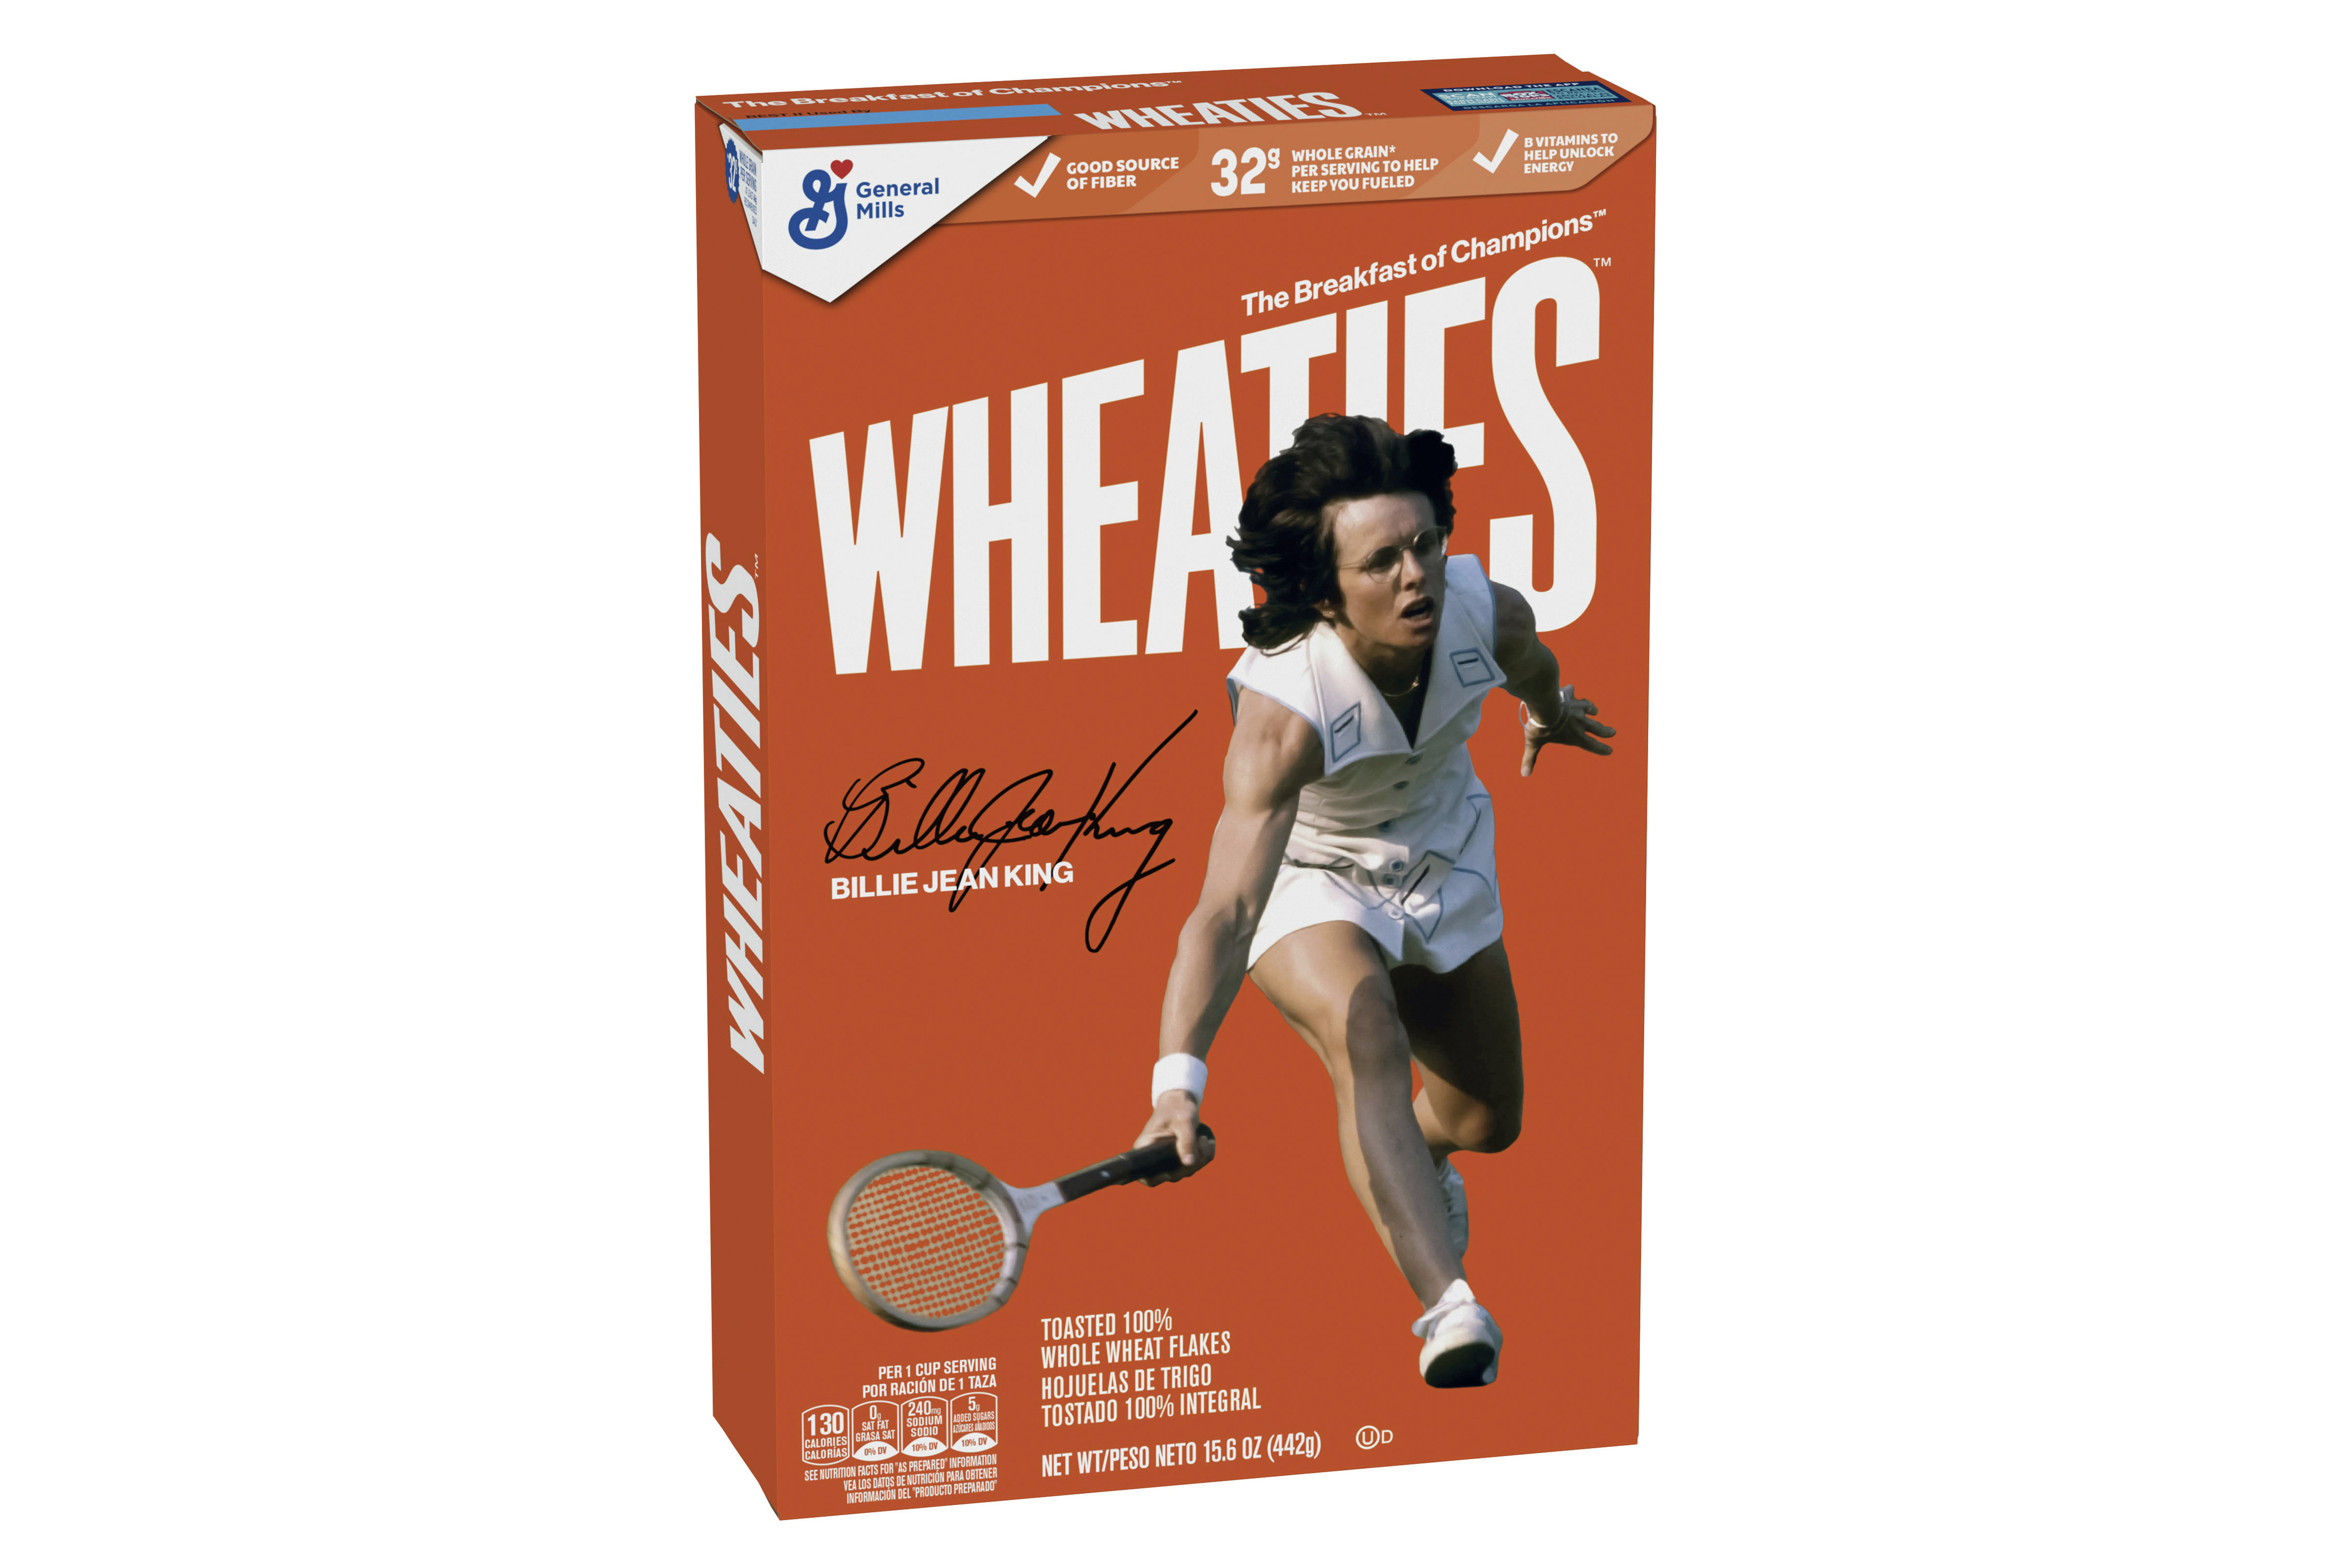 Billie Jean King getting the Breakfast of Champions treatment with Wheaties box cover